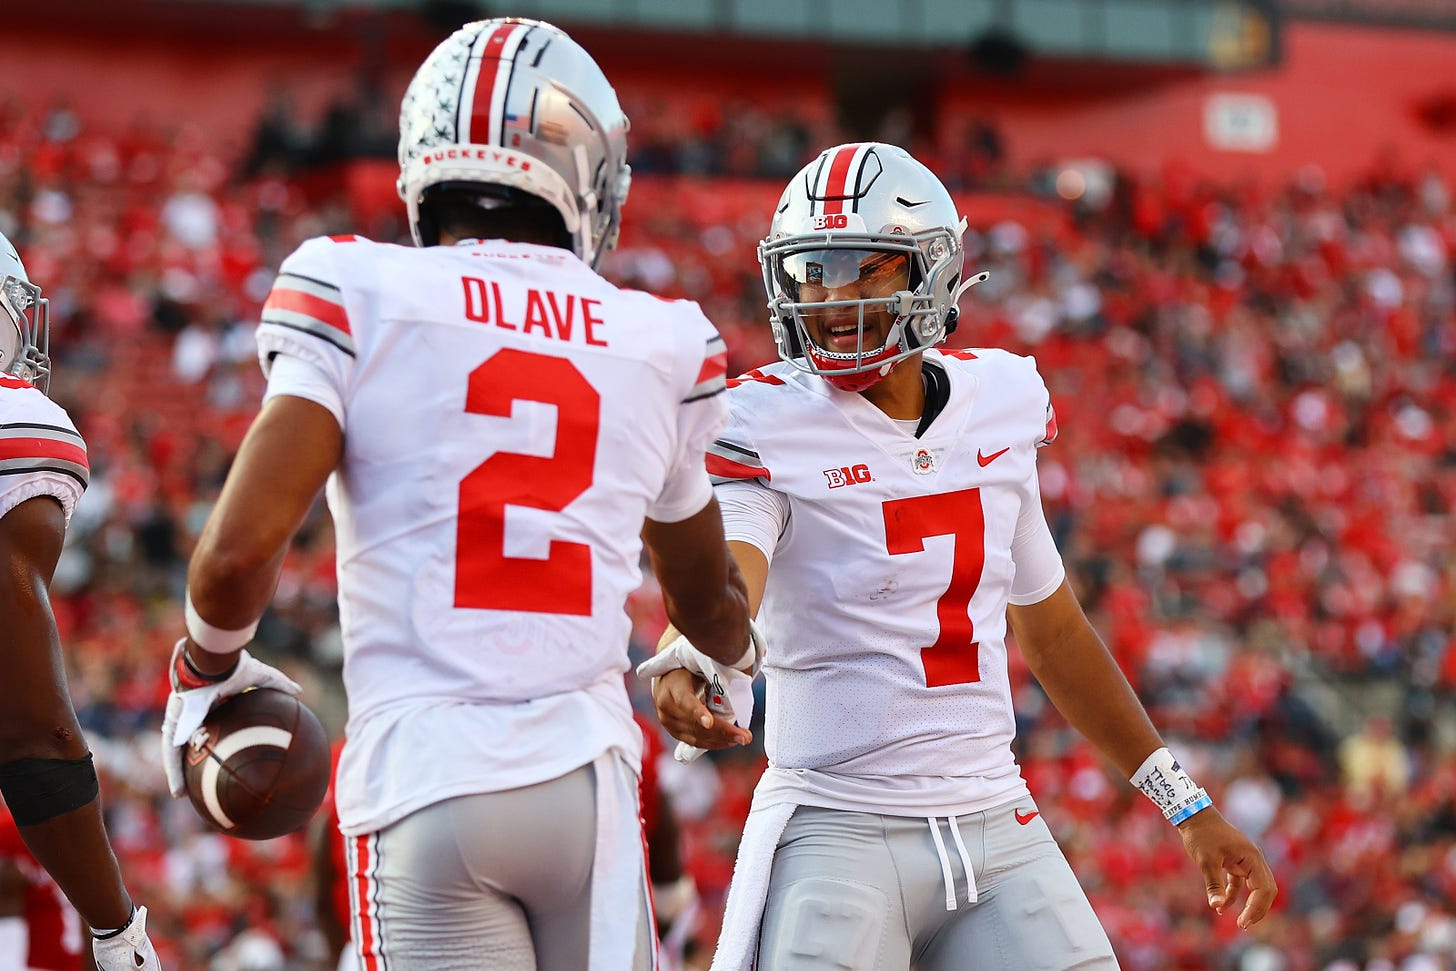 Ohio State Football: Don't panic, the Buckeyes are coming